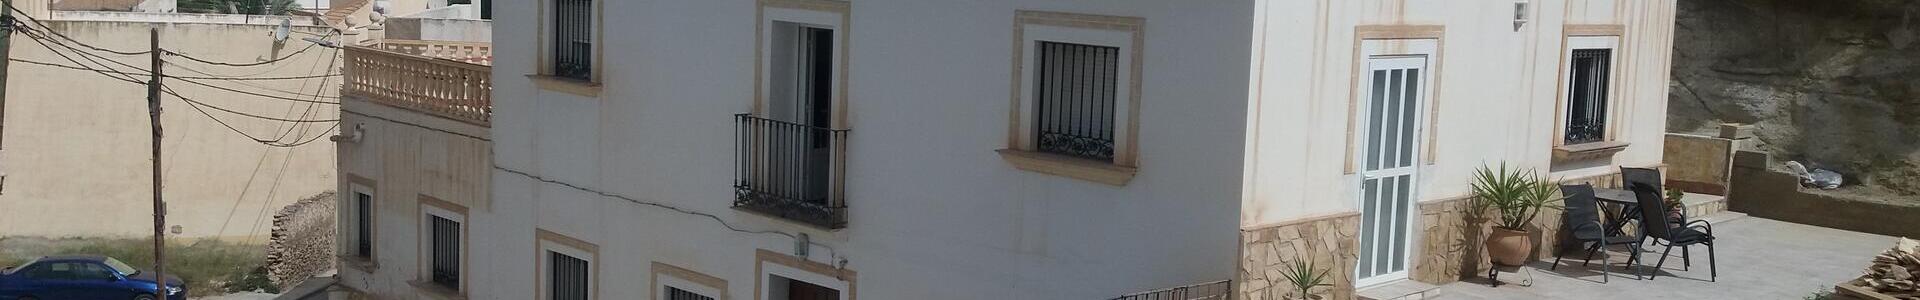 130-1246: 4 Bedroom Cortijo: Traditional Cottage for Sale